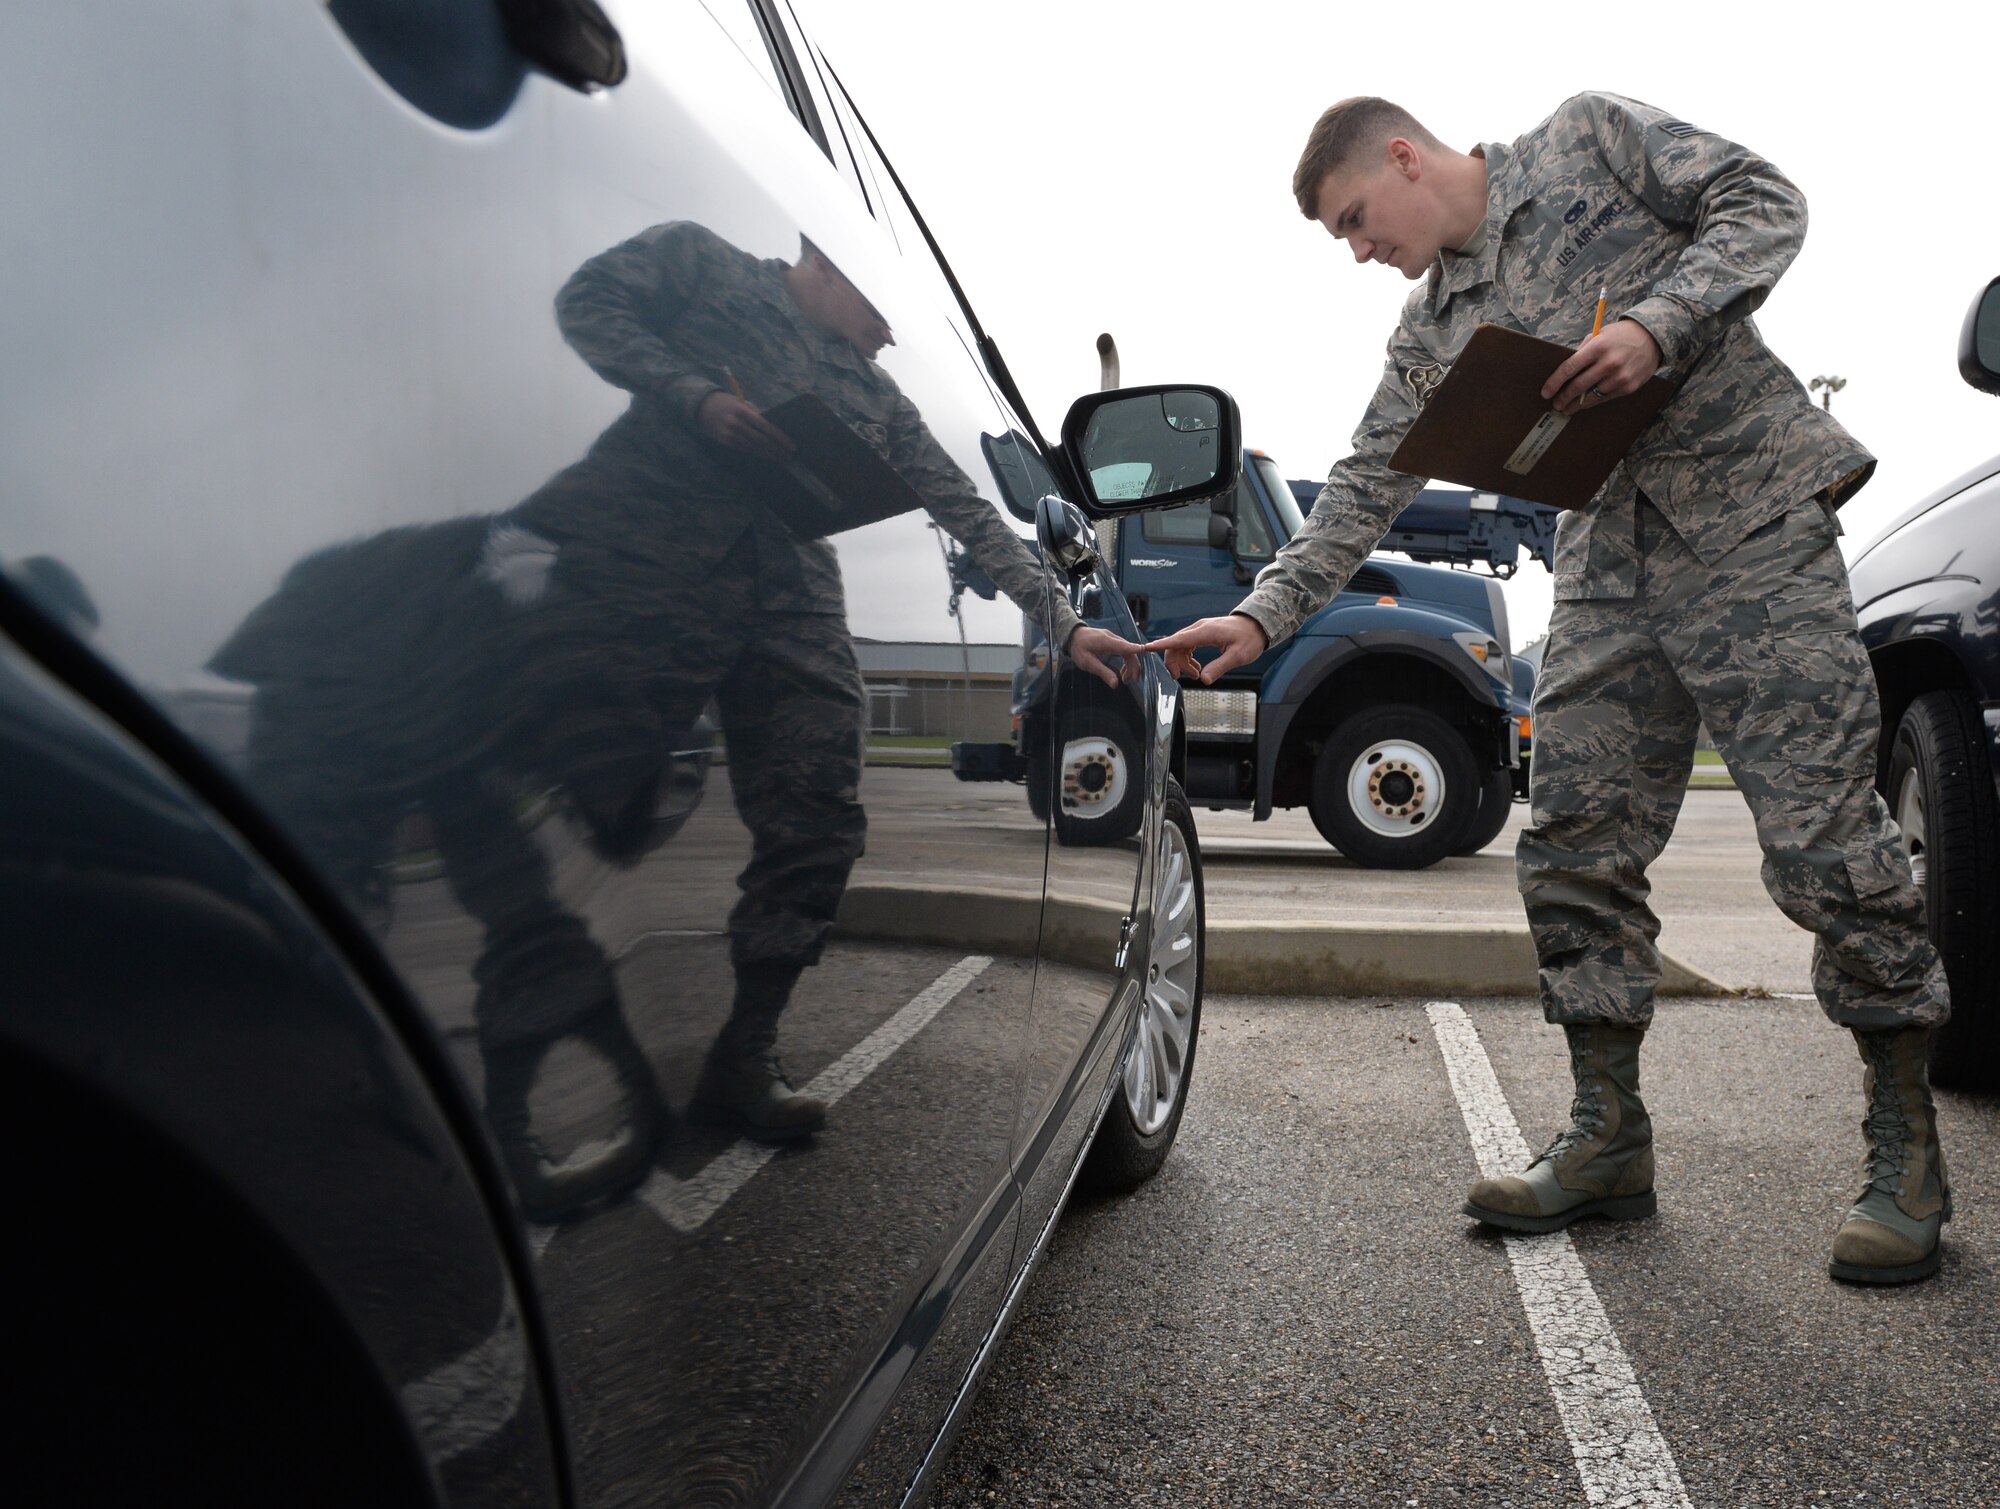 Senior Airman Ryan Fitzgerald, 81st Logistics Readiness Squadron vehicle management and analysis technician, inspects a vehicle March 11, 2015, Keesler Air Force Base, Miss. The more than 40 member maintenance flight repair and oversee more than 420 government vehicles that belong to Keesler. (U.S. Air Force photo by Senior Airman Holly Mansfield)